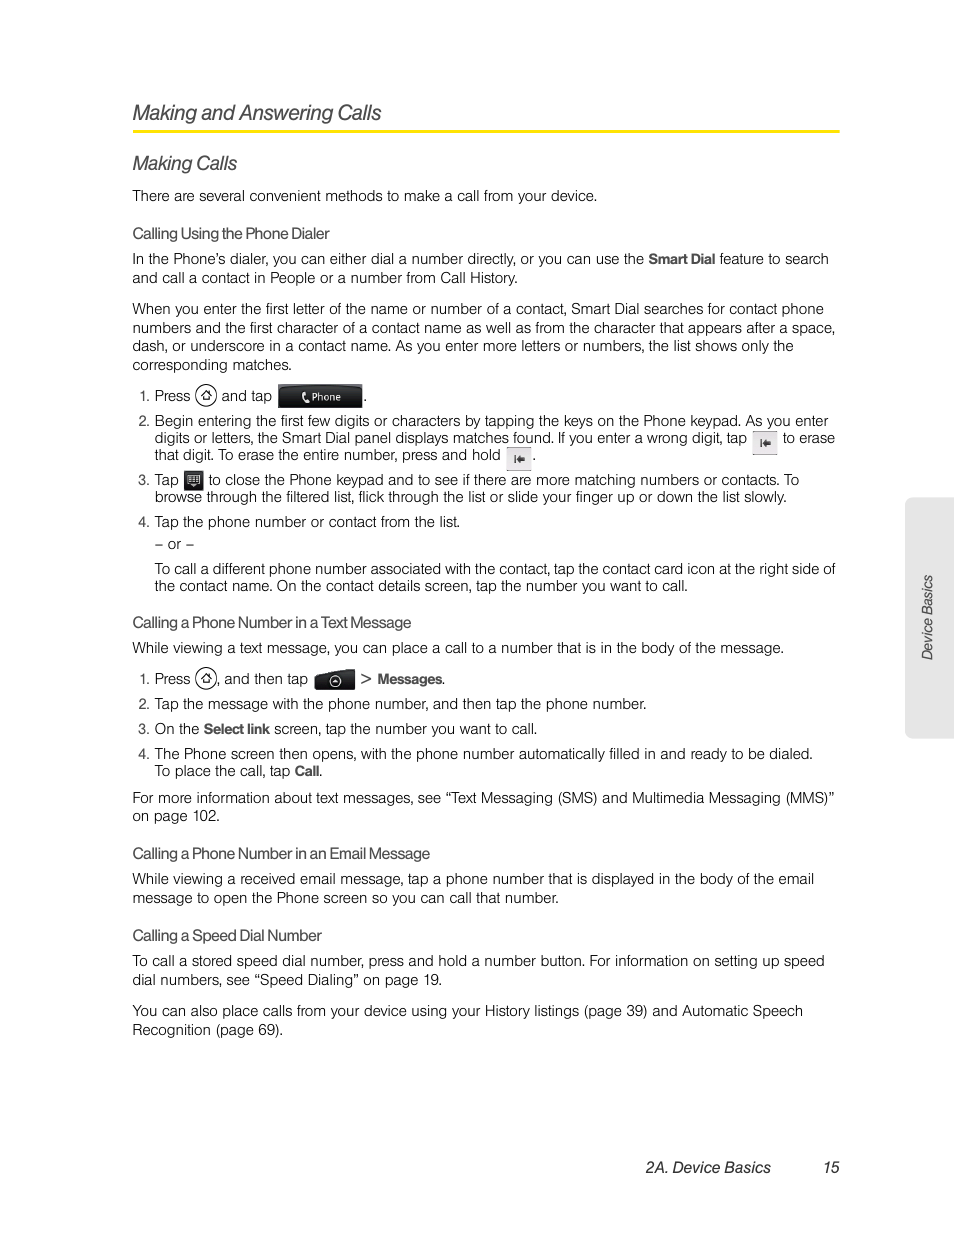 Making and answering calls, Making calls | HTC EVO 4G User Manual | Page 25 / 197